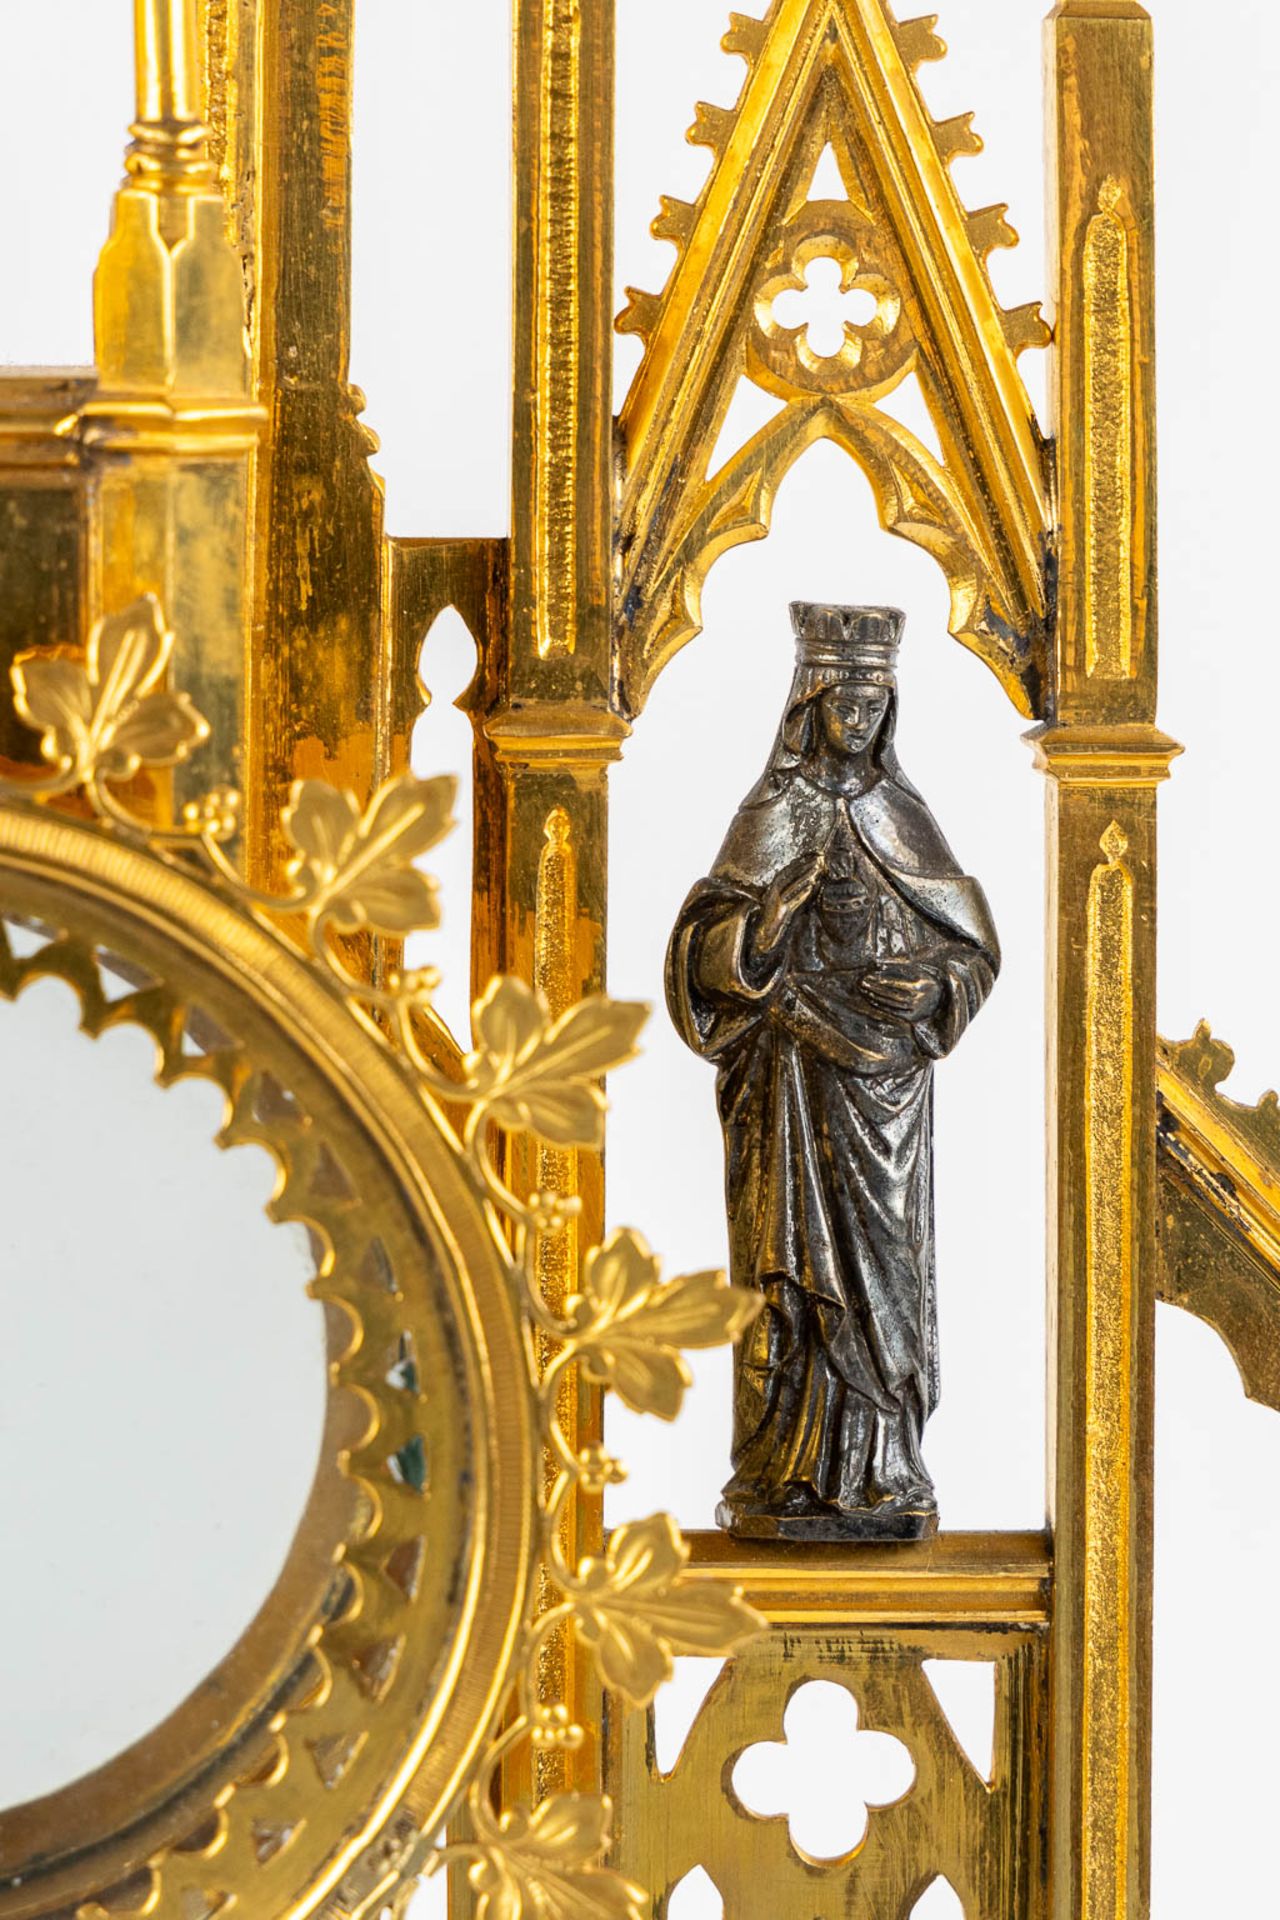 A Tower monstrance, gilt and silver plated brass, Gothic Revival. 19th C. (W:21,5 x H:58 cm) - Bild 4 aus 22